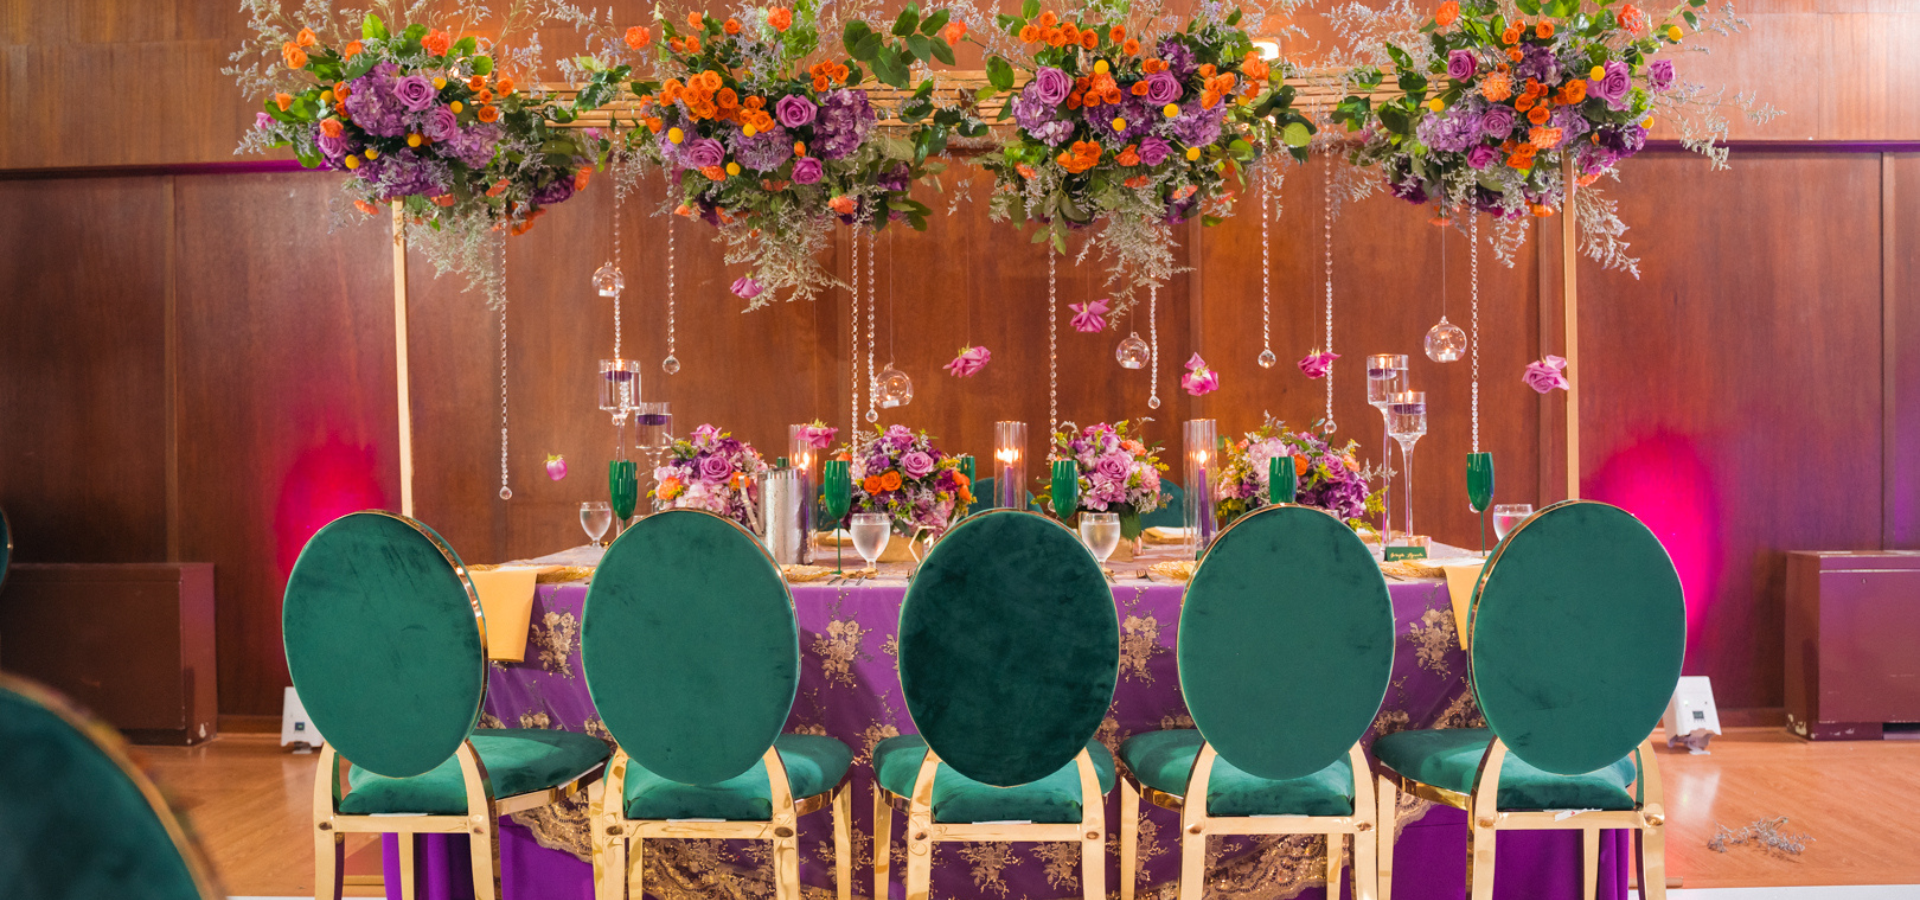 Artsy, maximalist, golden and green table setup